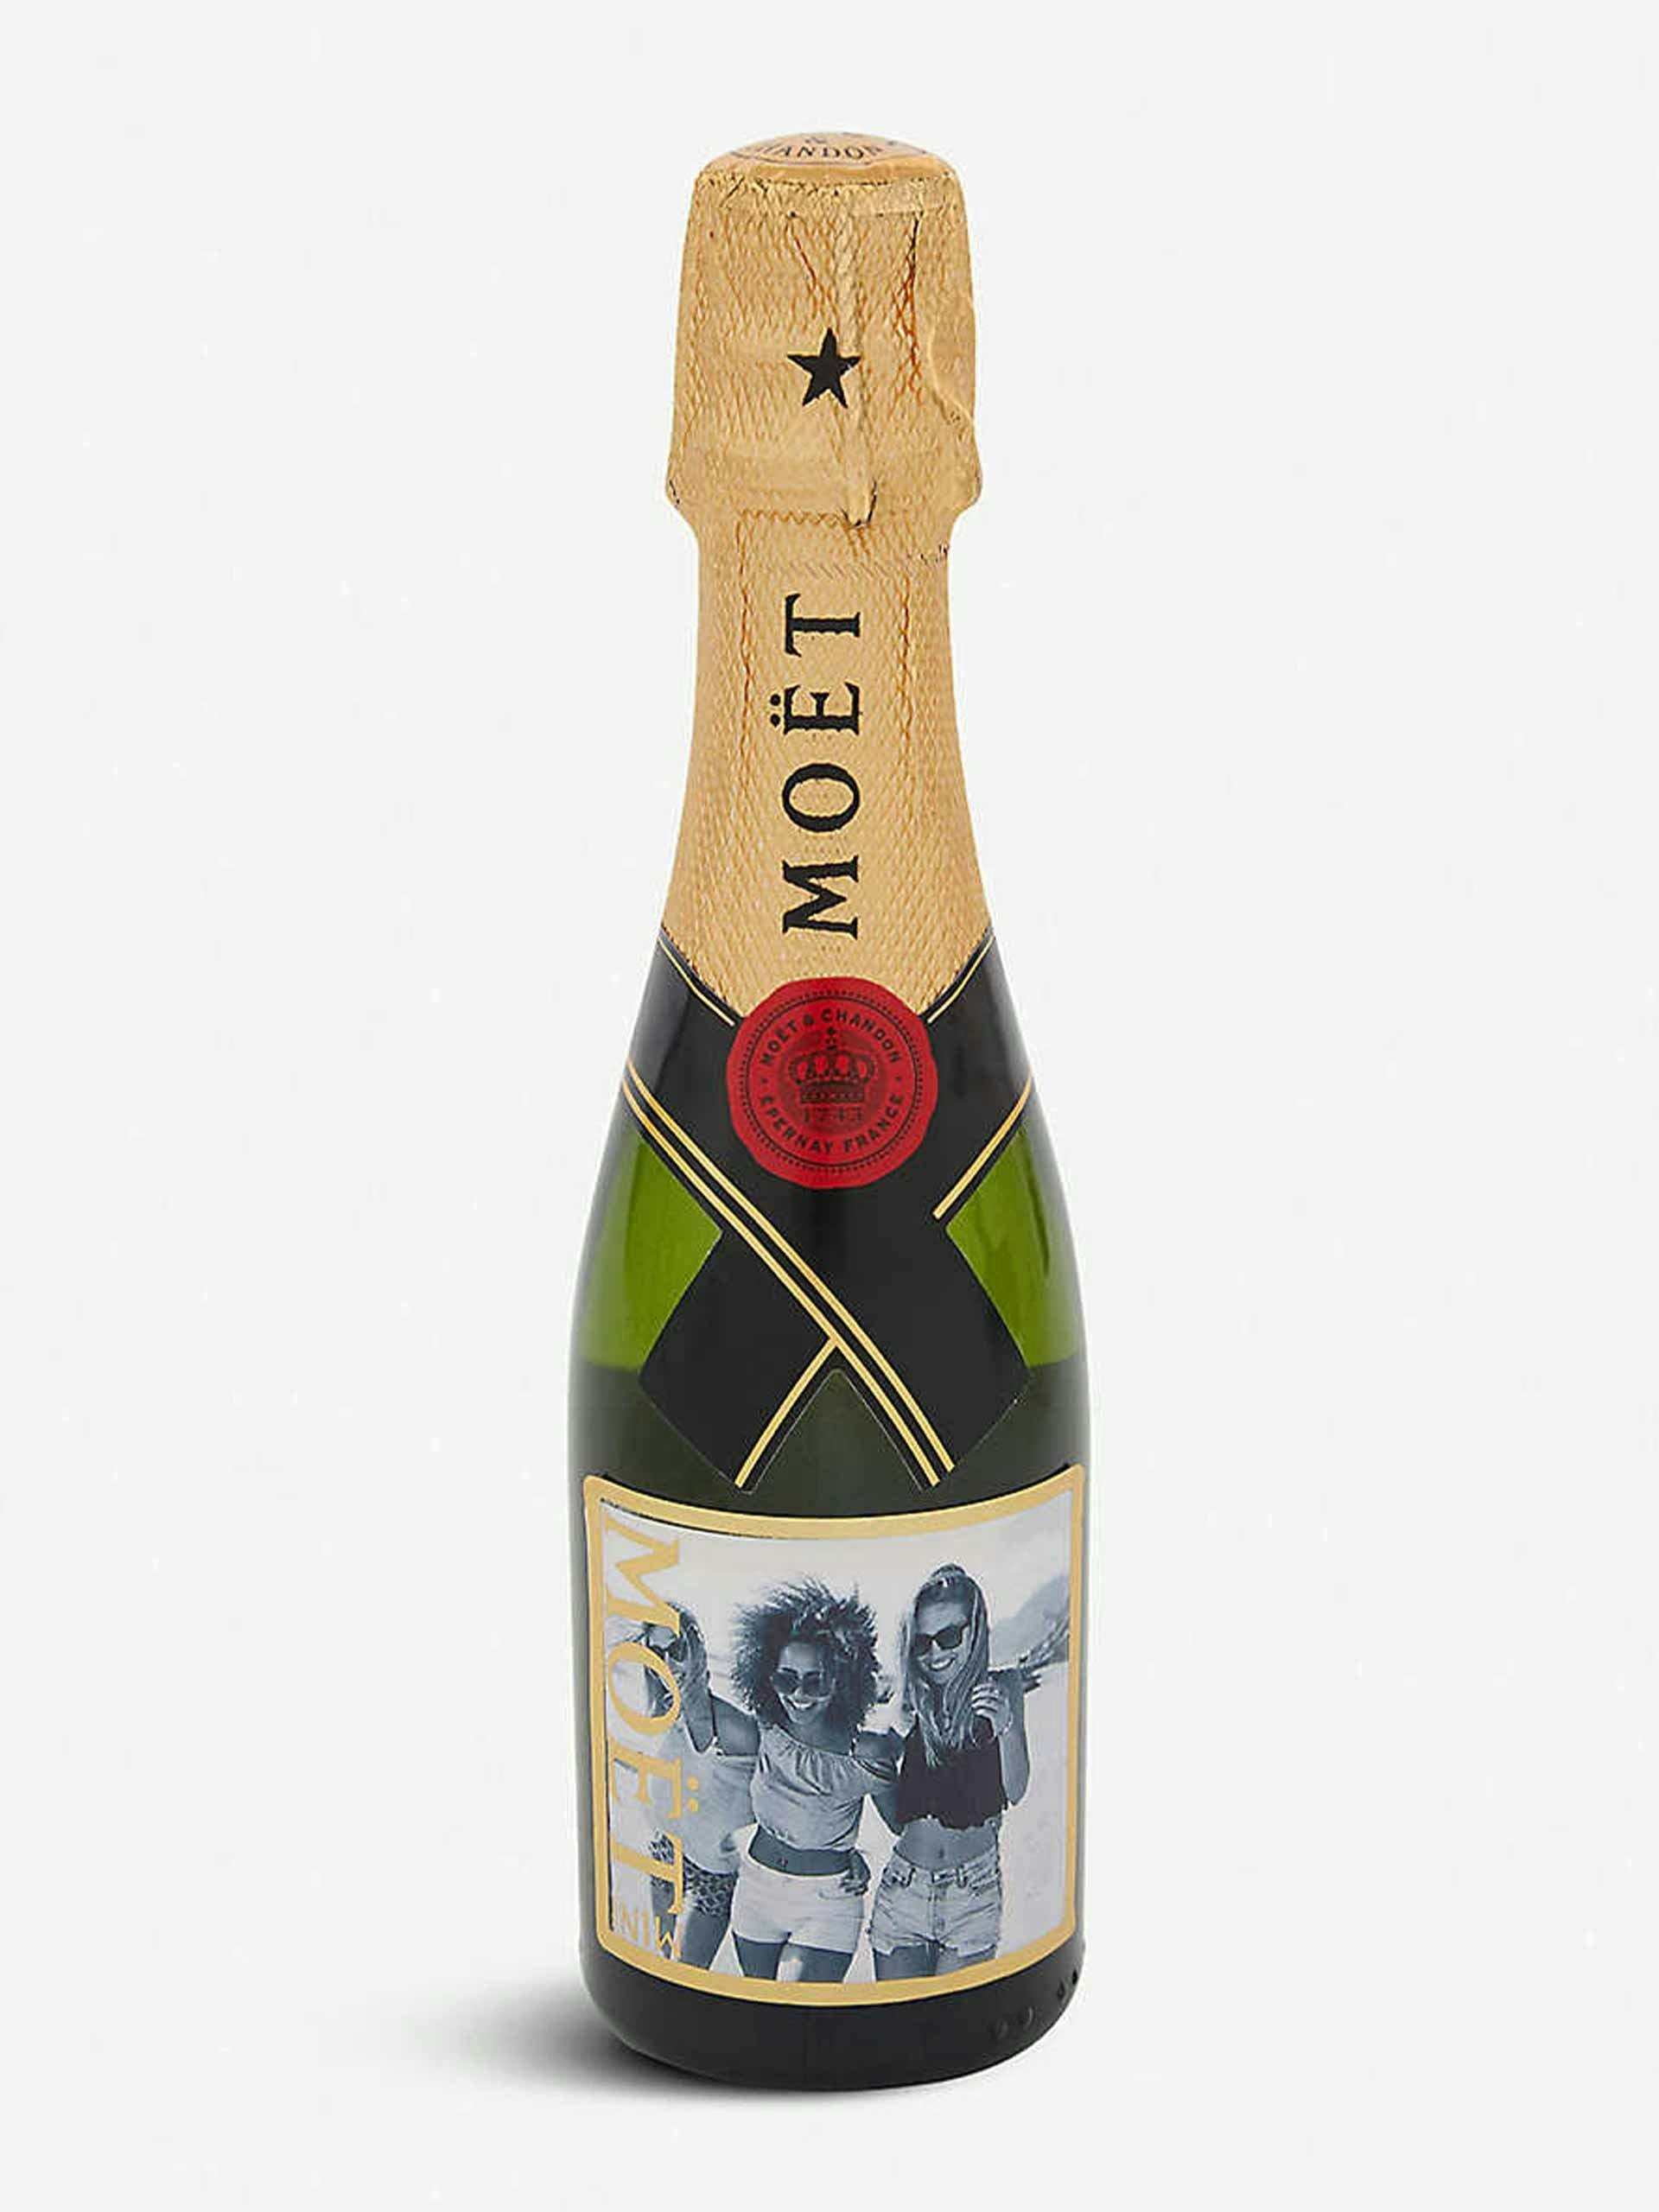 Personalised champagne bottle